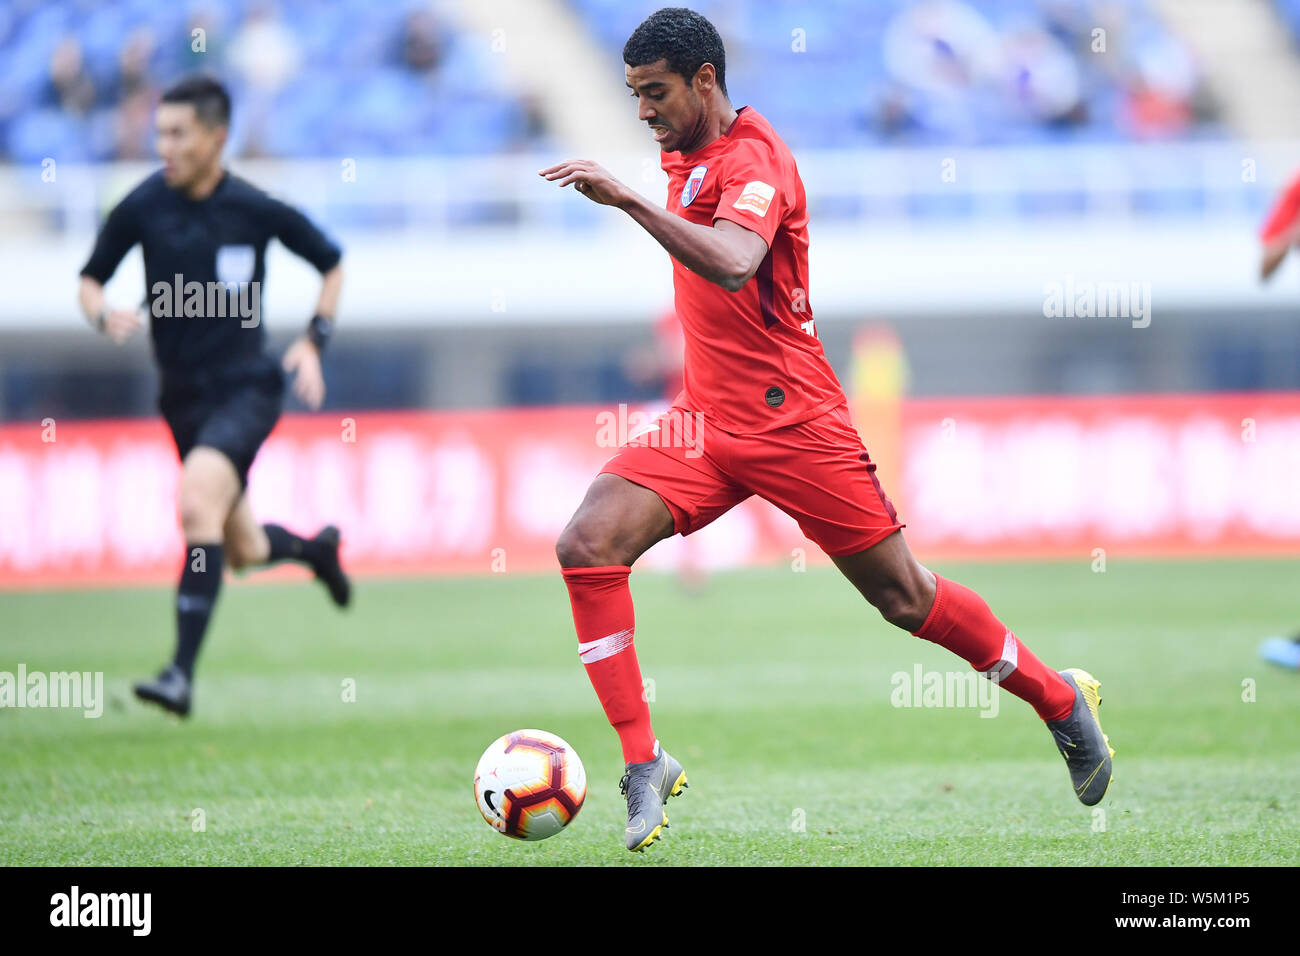 Brazilian football player Alan Douglas Borges de Carvalho, simply known as Alan, of Tianjin Tianhai dribbles against Hebei China Fortune in their 4th Stock Photo